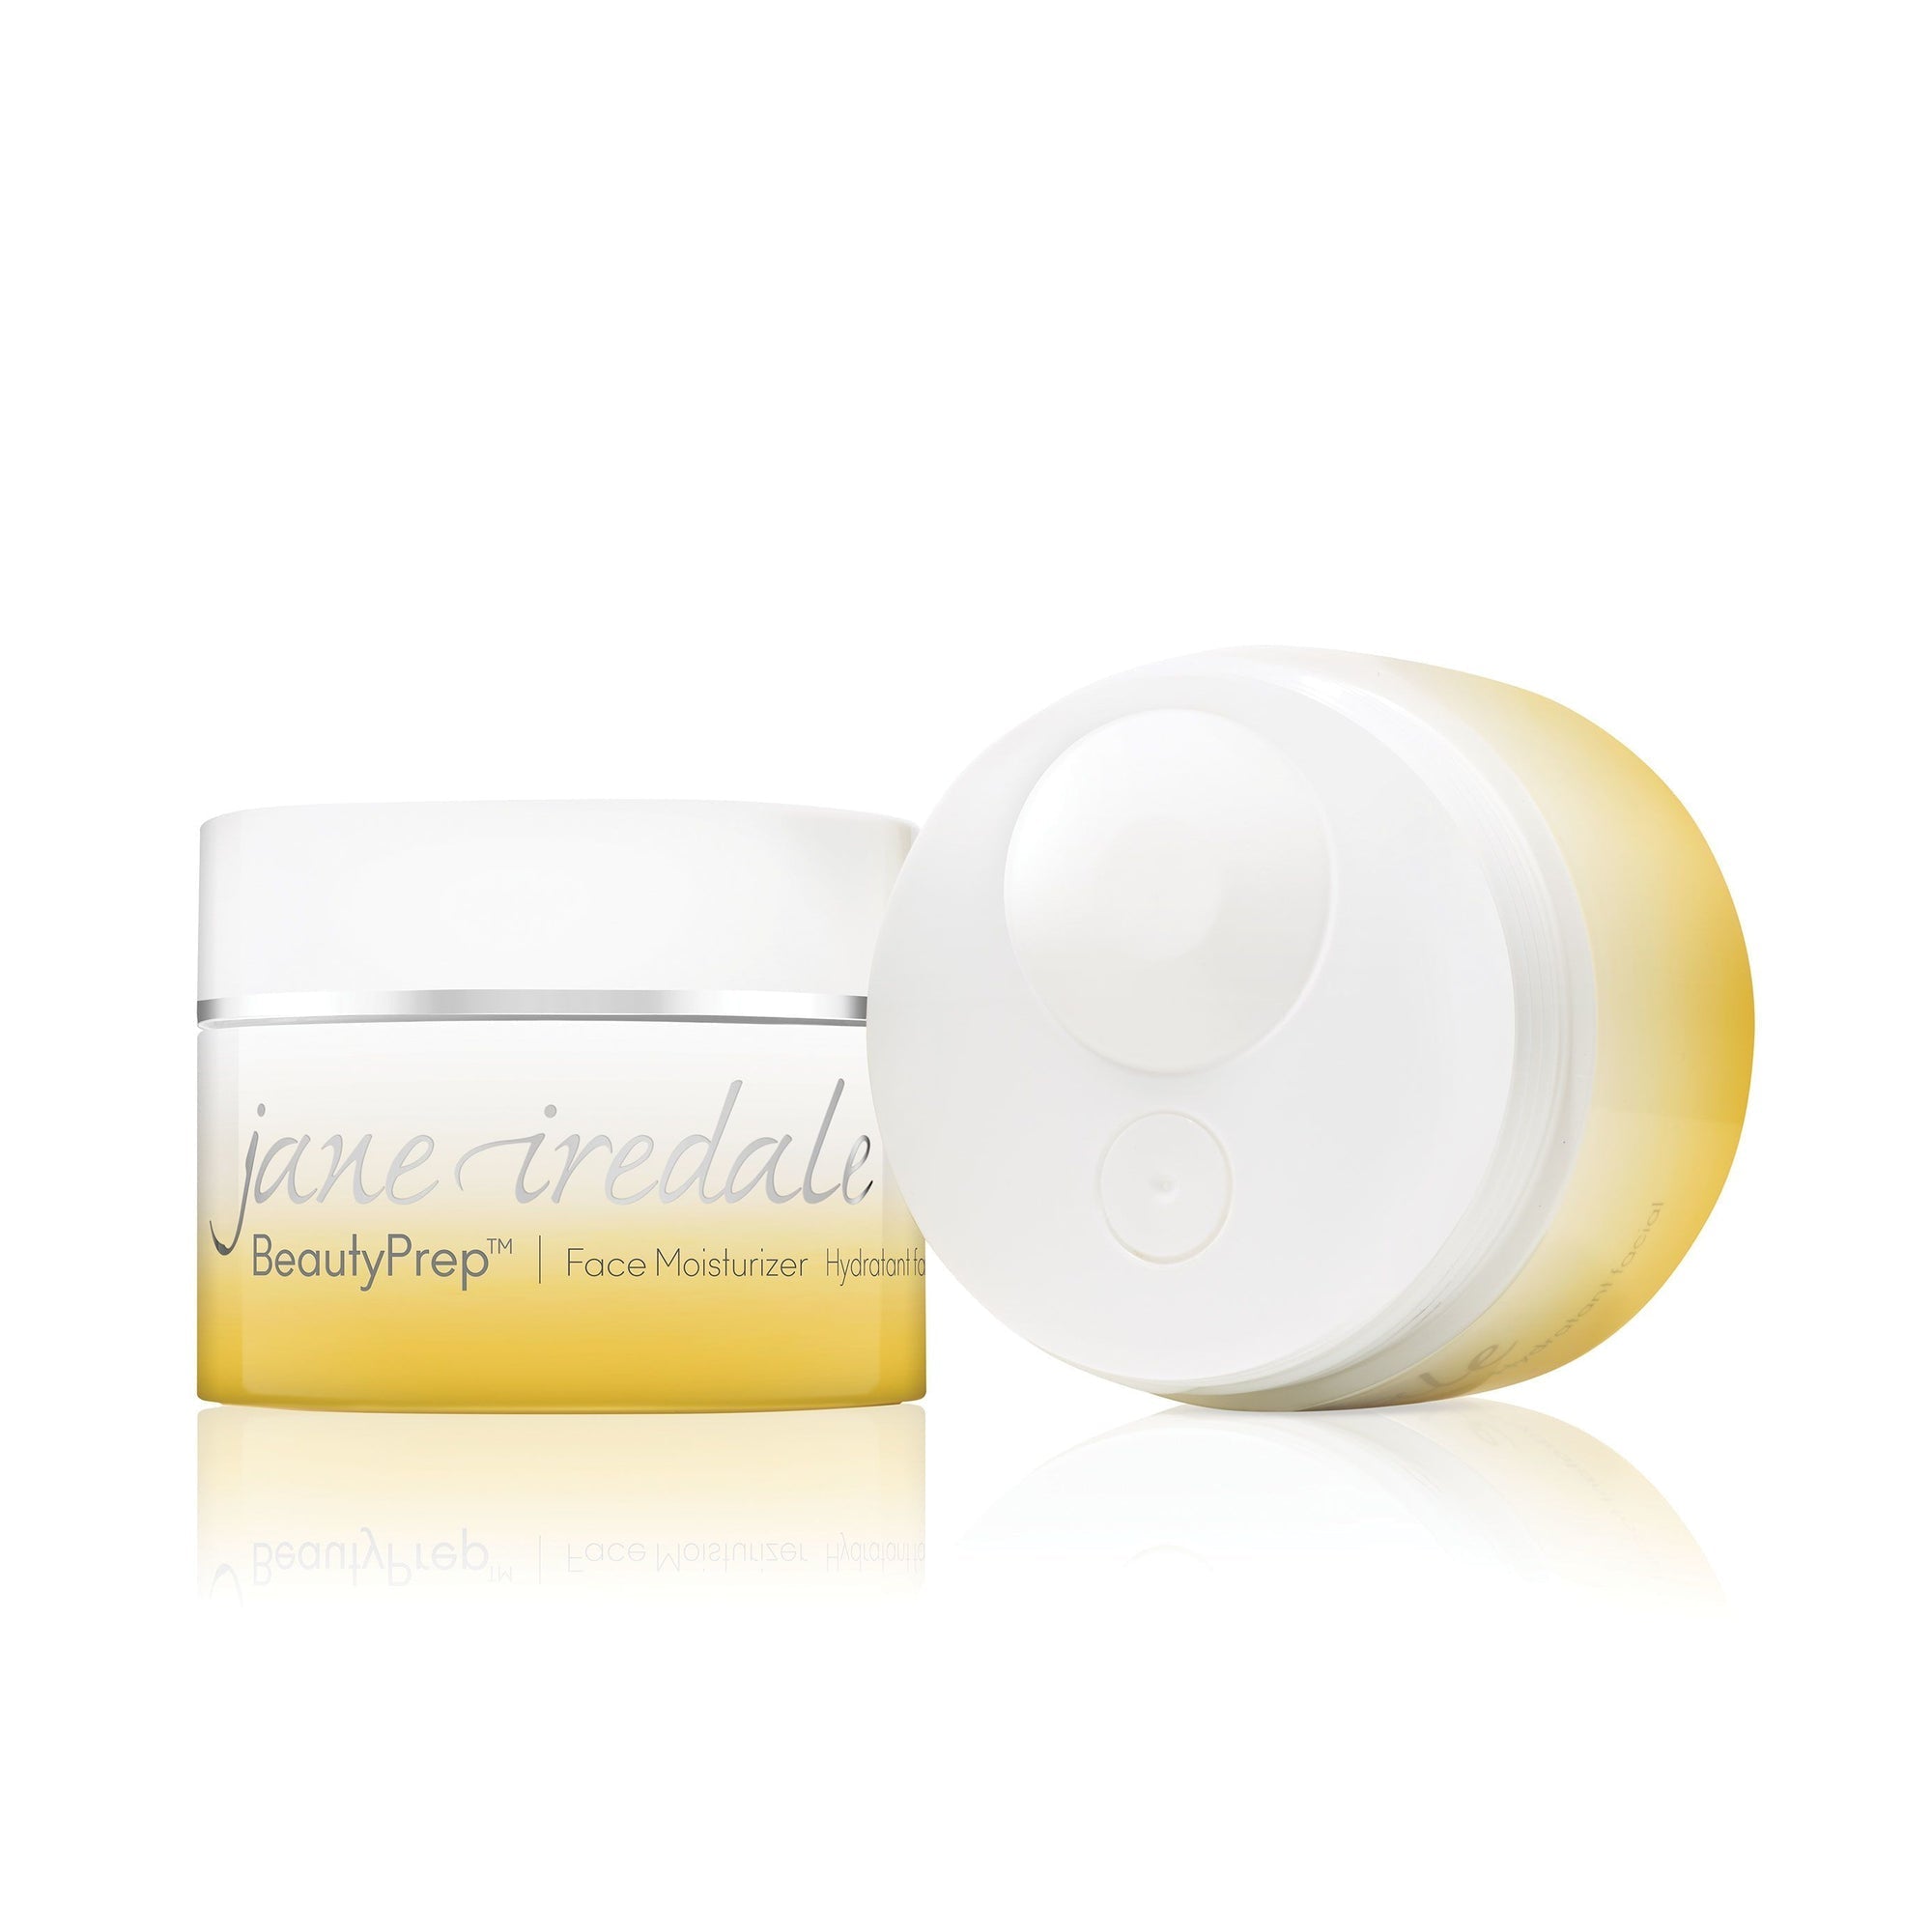 Load image into Gallery viewer, Jane Iredale BeautyPrep Face Moisturizer
